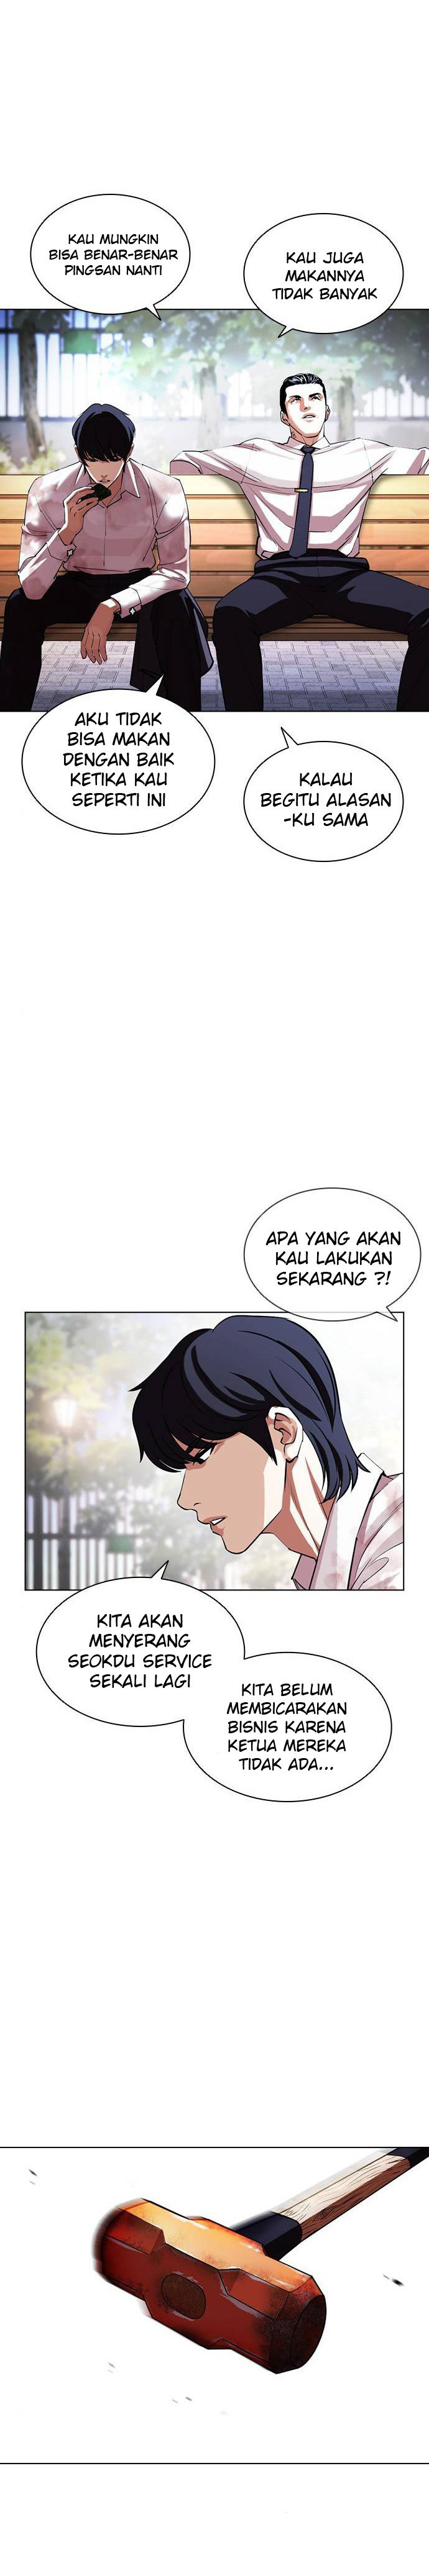 Lookism Chapter 407 Image 14